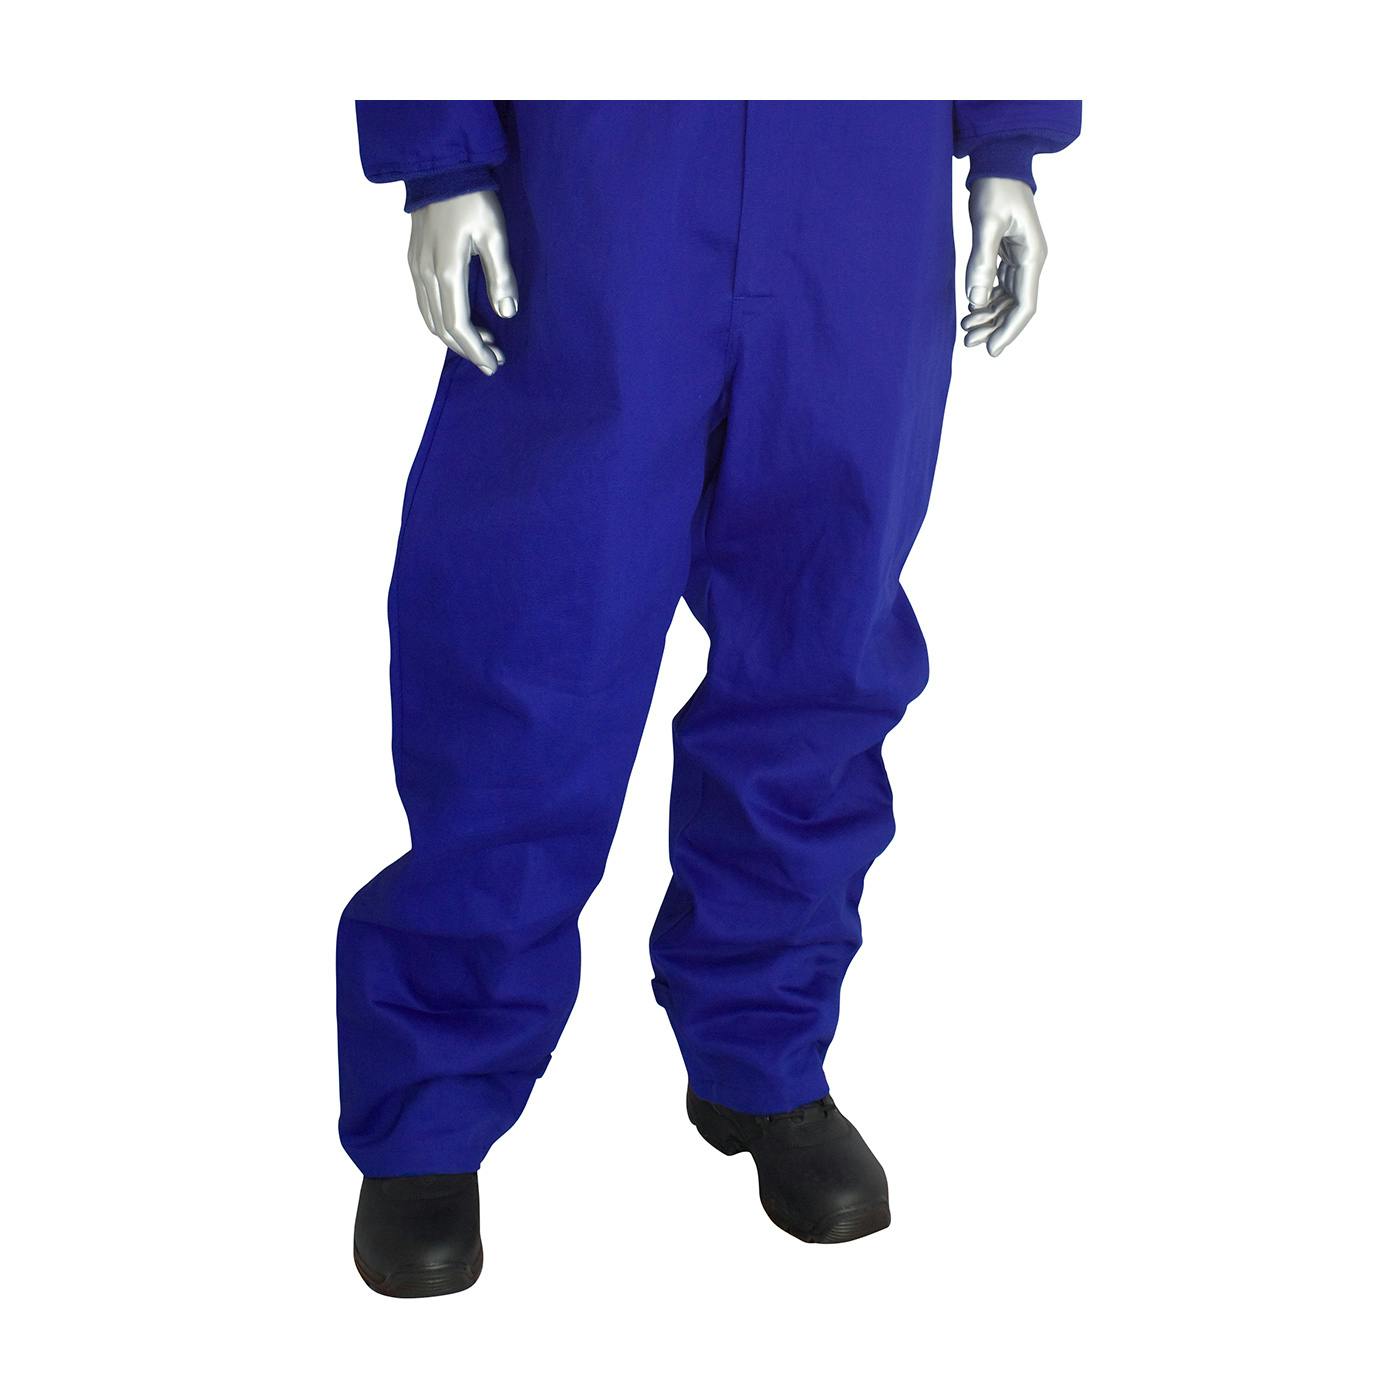 AR/FR Dual Certified Coverall with Vented Back - 8 Cal/cm2, Blue (9100-2120D)